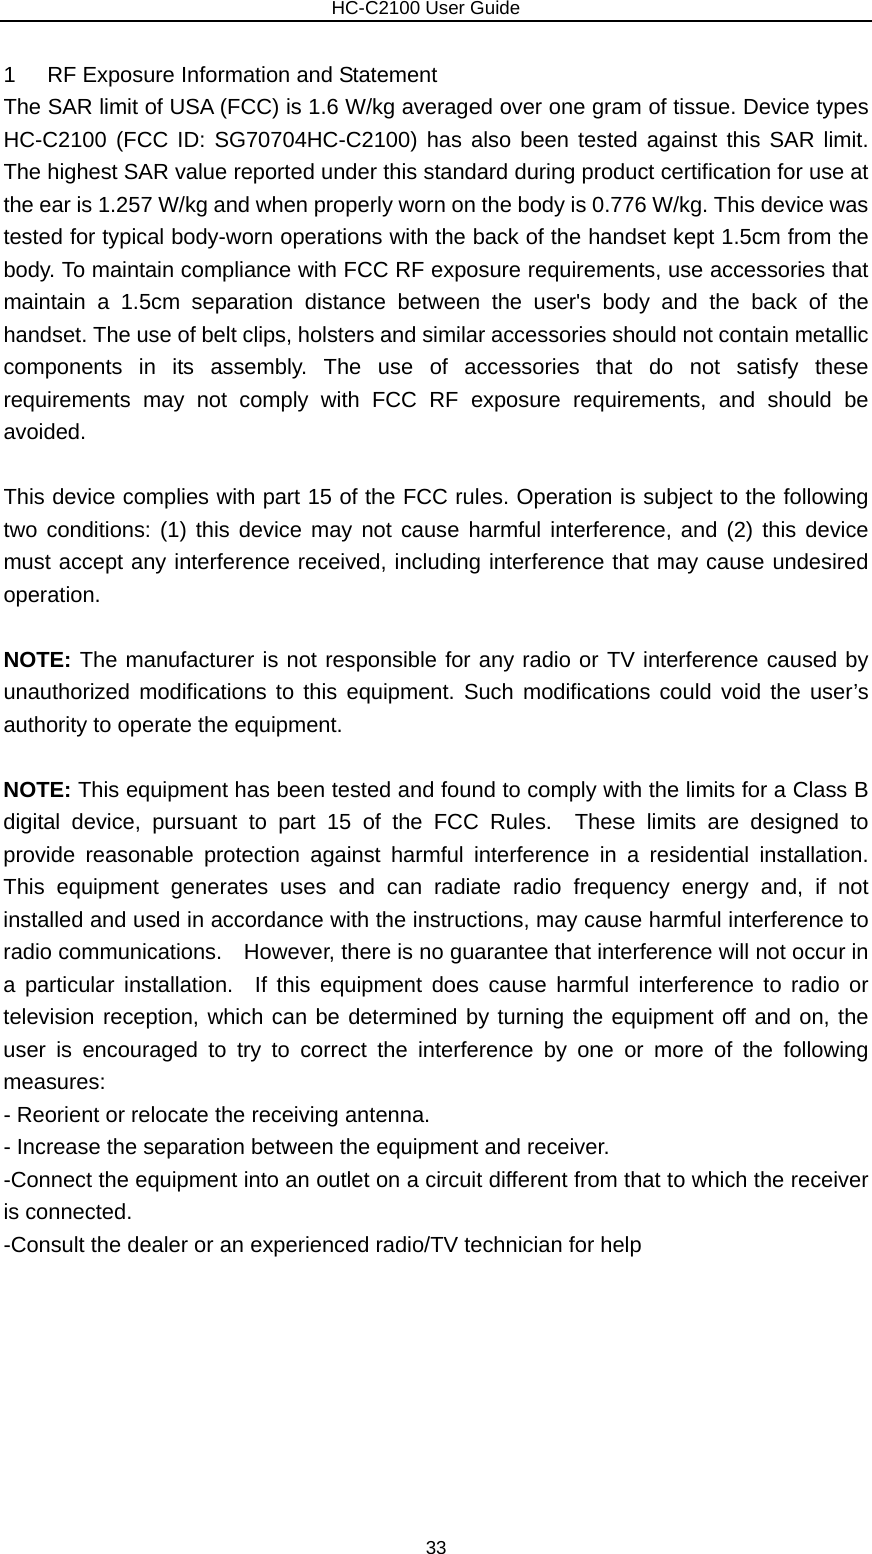                        HC-C2100 User Guide 1  RF Exposure Information and Statement   The SAR limit of USA (FCC) is 1.6 W/kg averaged over one gram of tissue. Device types HC-C2100 (FCC ID: SG70704HC-C2100) has also been tested against this SAR limit. The highest SAR value reported under this standard during product certification for use at the ear is 1.257 W/kg and when properly worn on the body is 0.776 W/kg. This device was tested for typical body-worn operations with the back of the handset kept 1.5cm from the body. To maintain compliance with FCC RF exposure requirements, use accessories that maintain a 1.5cm separation distance between the user&apos;s body and the back of the handset. The use of belt clips, holsters and similar accessories should not contain metallic components in its assembly. The use of accessories that do not satisfy these requirements may not comply with FCC RF exposure requirements, and should be avoided.  This device complies with part 15 of the FCC rules. Operation is subject to the following two conditions: (1) this device may not cause harmful interference, and (2) this device must accept any interference received, including interference that may cause undesired operation.  NOTE: The manufacturer is not responsible for any radio or TV interference caused by unauthorized modifications to this equipment. Such modifications could void the user’s authority to operate the equipment.  NOTE: This equipment has been tested and found to comply with the limits for a Class B digital device, pursuant to part 15 of the FCC Rules.  These limits are designed to provide reasonable protection against harmful interference in a residential installation.  This equipment generates uses and can radiate radio frequency energy and, if not installed and used in accordance with the instructions, may cause harmful interference to radio communications.    However, there is no guarantee that interference will not occur in a particular installation.  If this equipment does cause harmful interference to radio or television reception, which can be determined by turning the equipment off and on, the user is encouraged to try to correct the interference by one or more of the following measures: - Reorient or relocate the receiving antenna. - Increase the separation between the equipment and receiver. -Connect the equipment into an outlet on a circuit different from that to which the receiver is connected. -Consult the dealer or an experienced radio/TV technician for help  33 